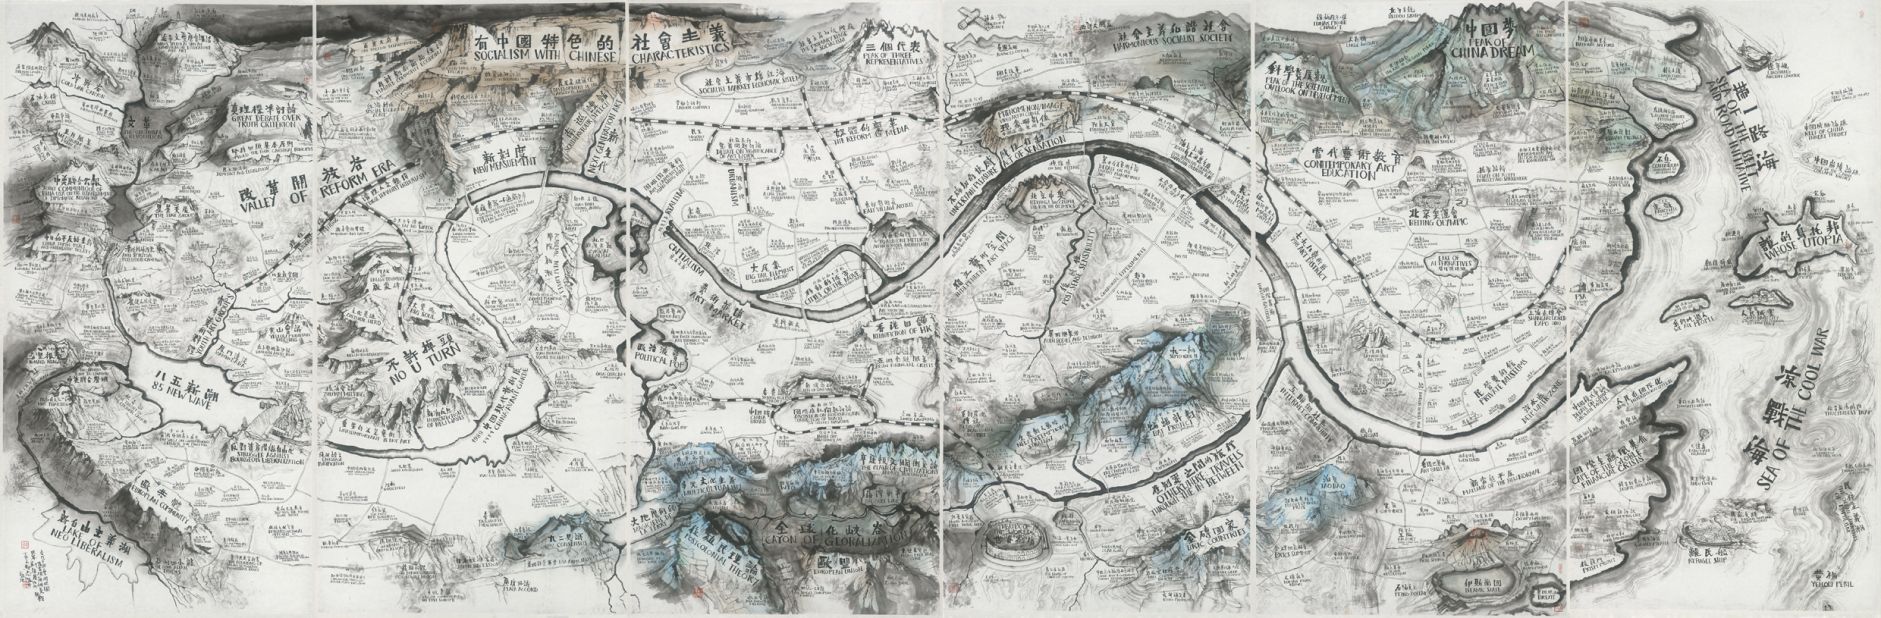 Qiu Zhijie's map of "Art and China after 1989: Theater of the World." The Chinese artist has work in the Q&A.